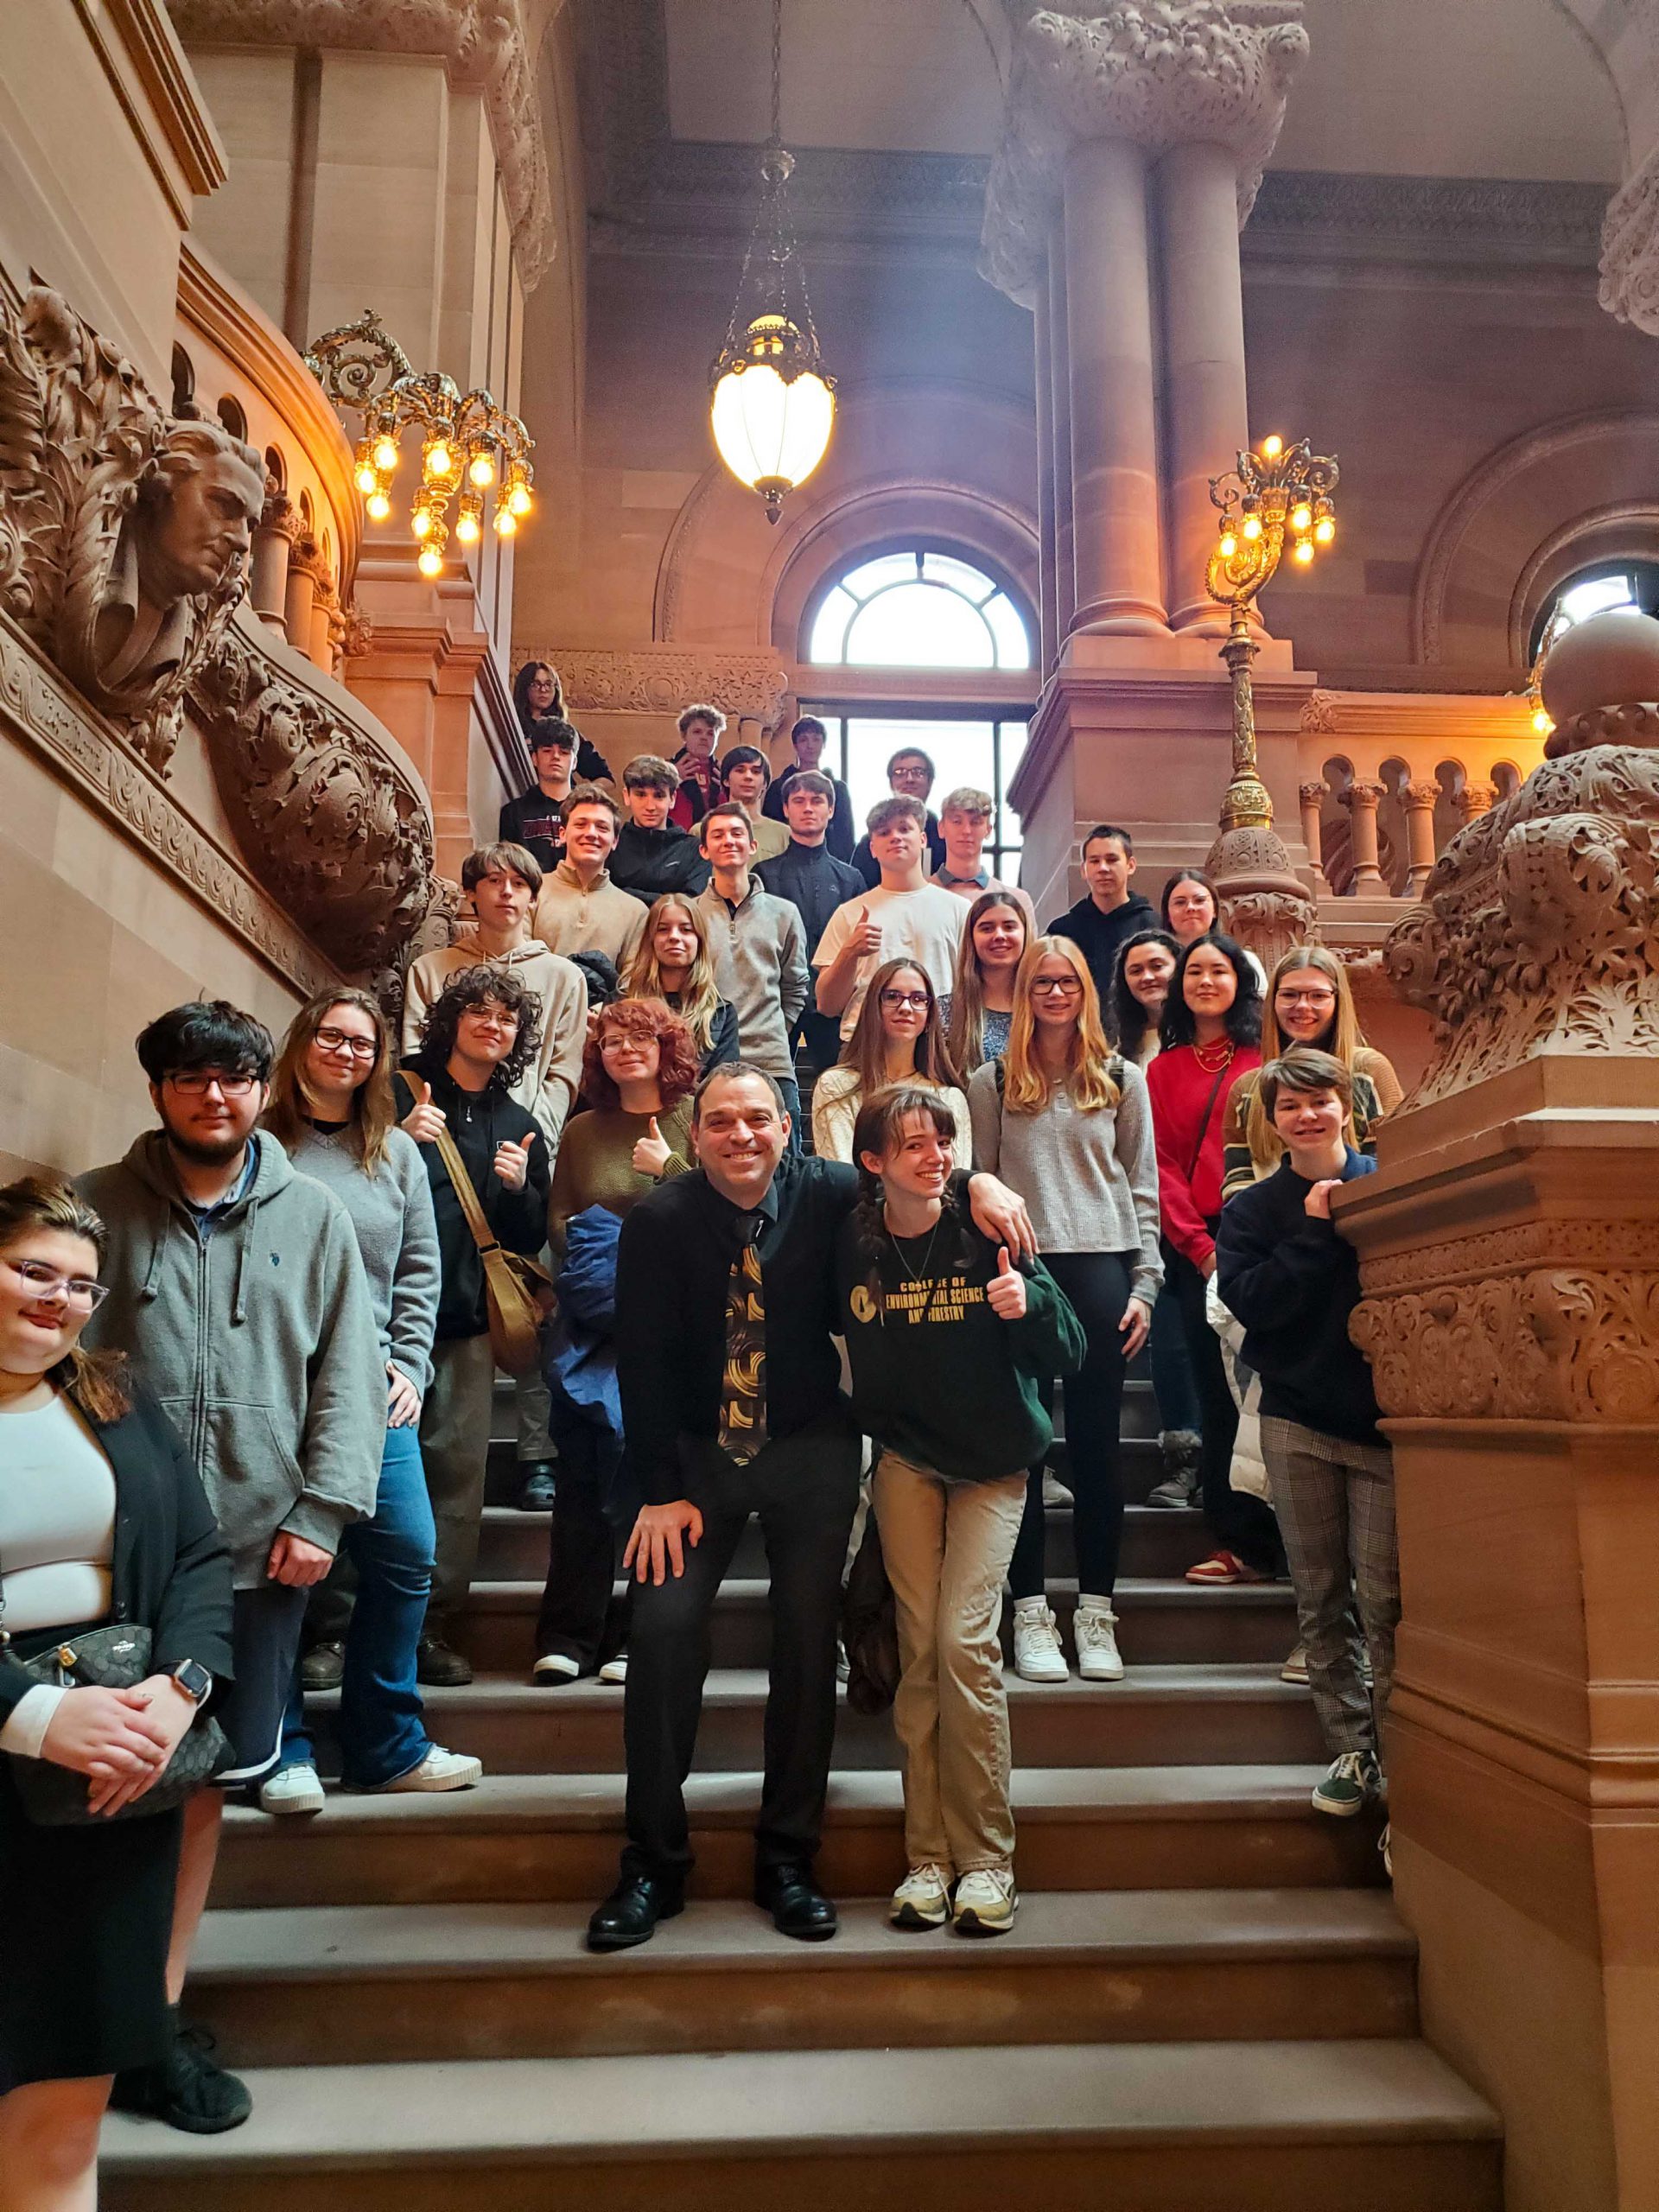 Students on the steps of the Million Dollar Staircase